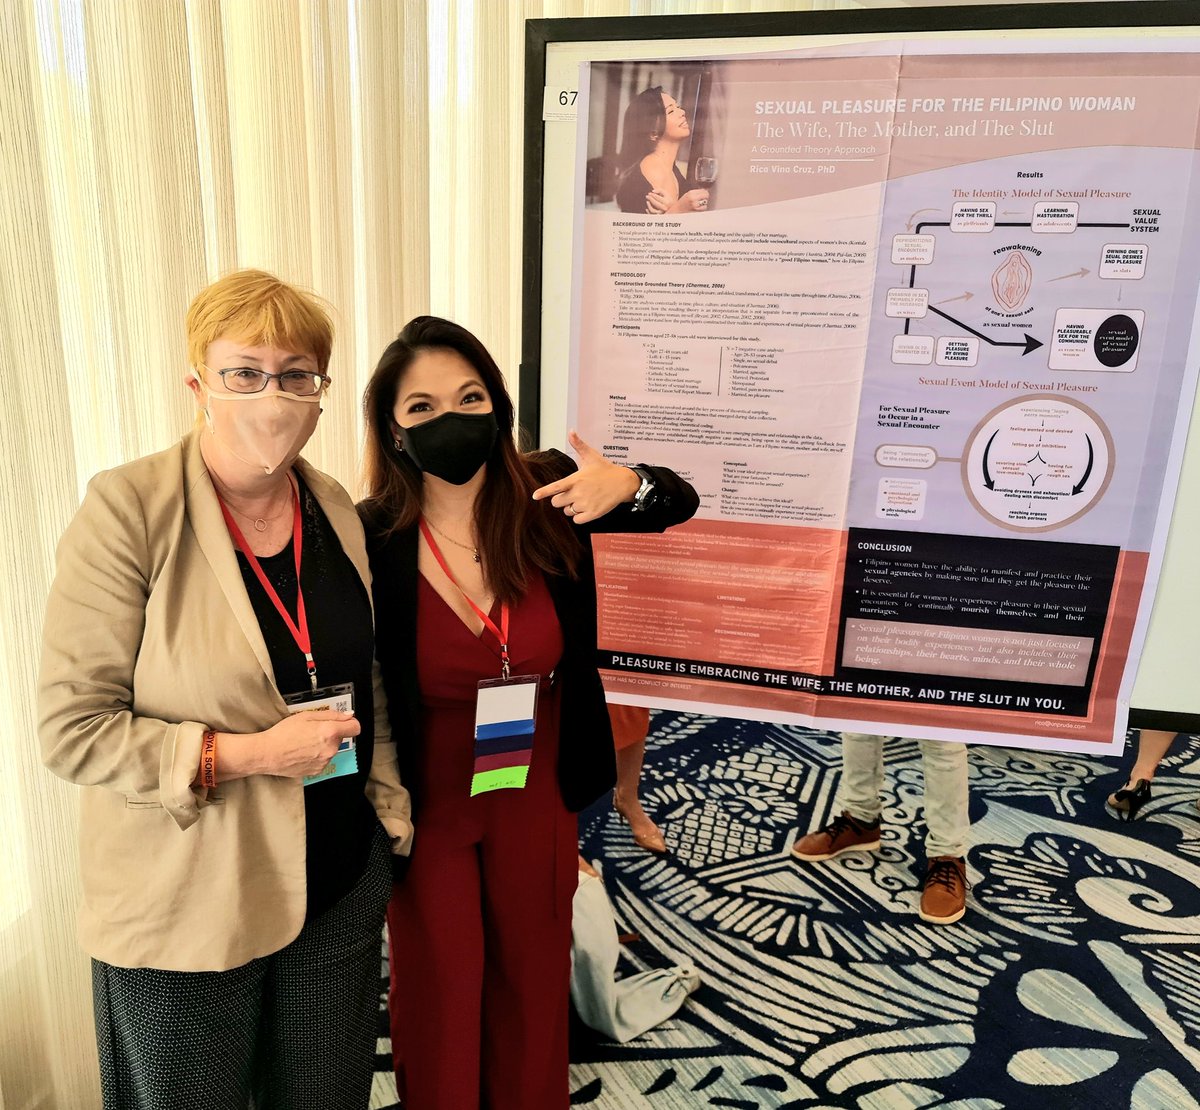 Presented my research on Filipino Women's Sexual Pleasure to @cygraham_graham at #SSSS2021 (I was sweating the whole time 😅) Thank you Dr. Graham for the encouragement to keep doing research. Now to write, fix, and publish this. 💗 @Sex_Science